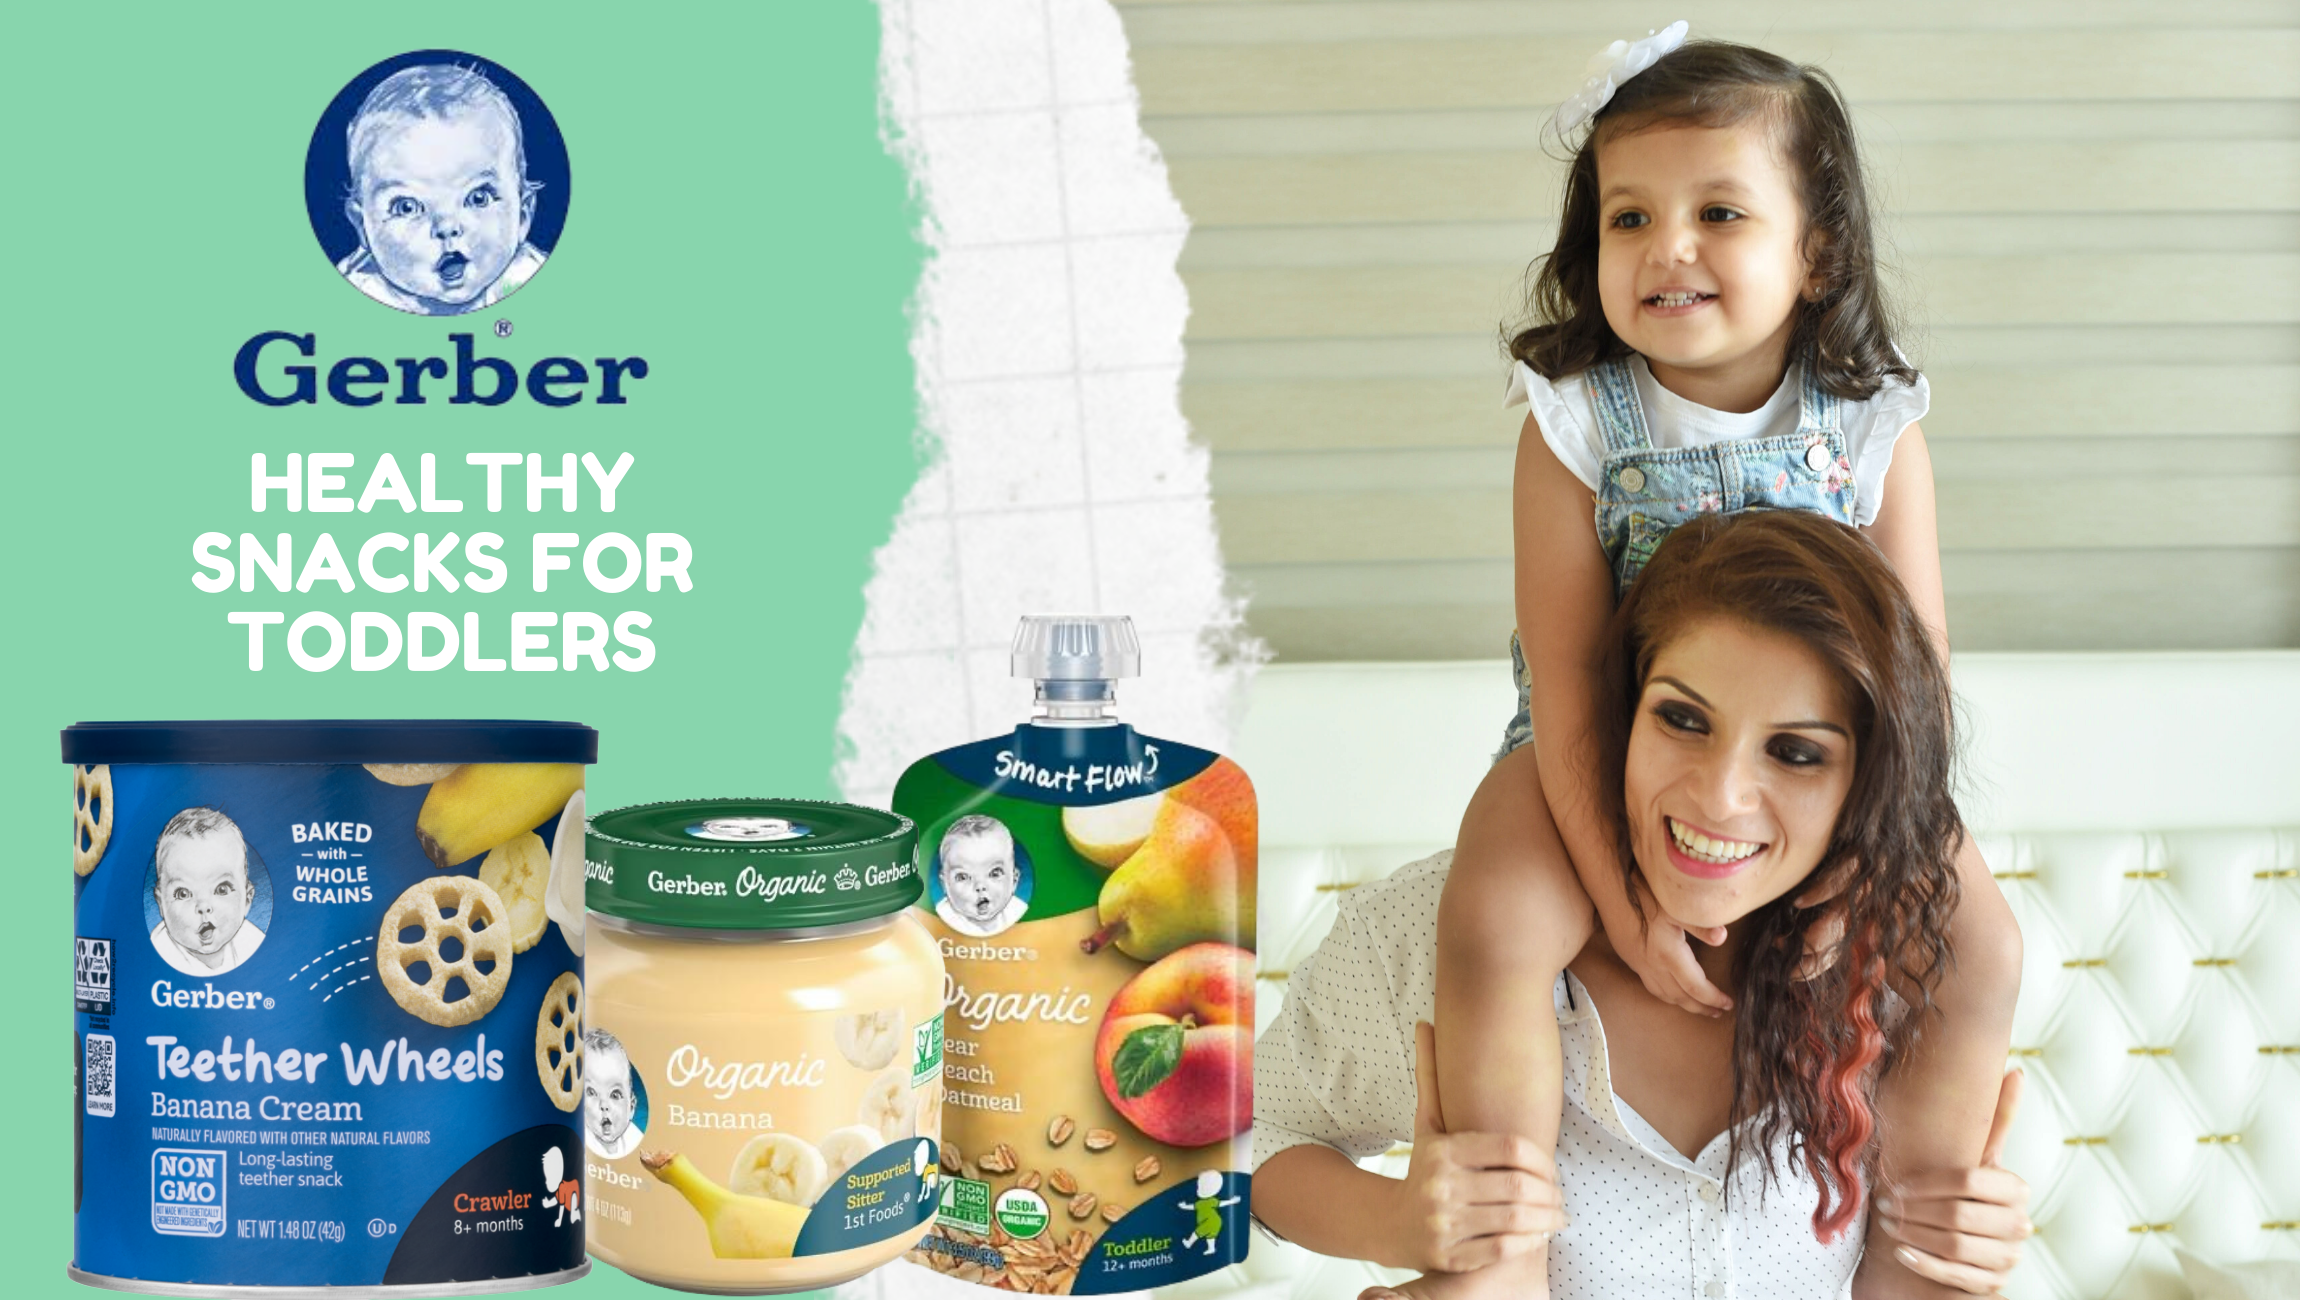 Toddler healthy snacks from Gerber